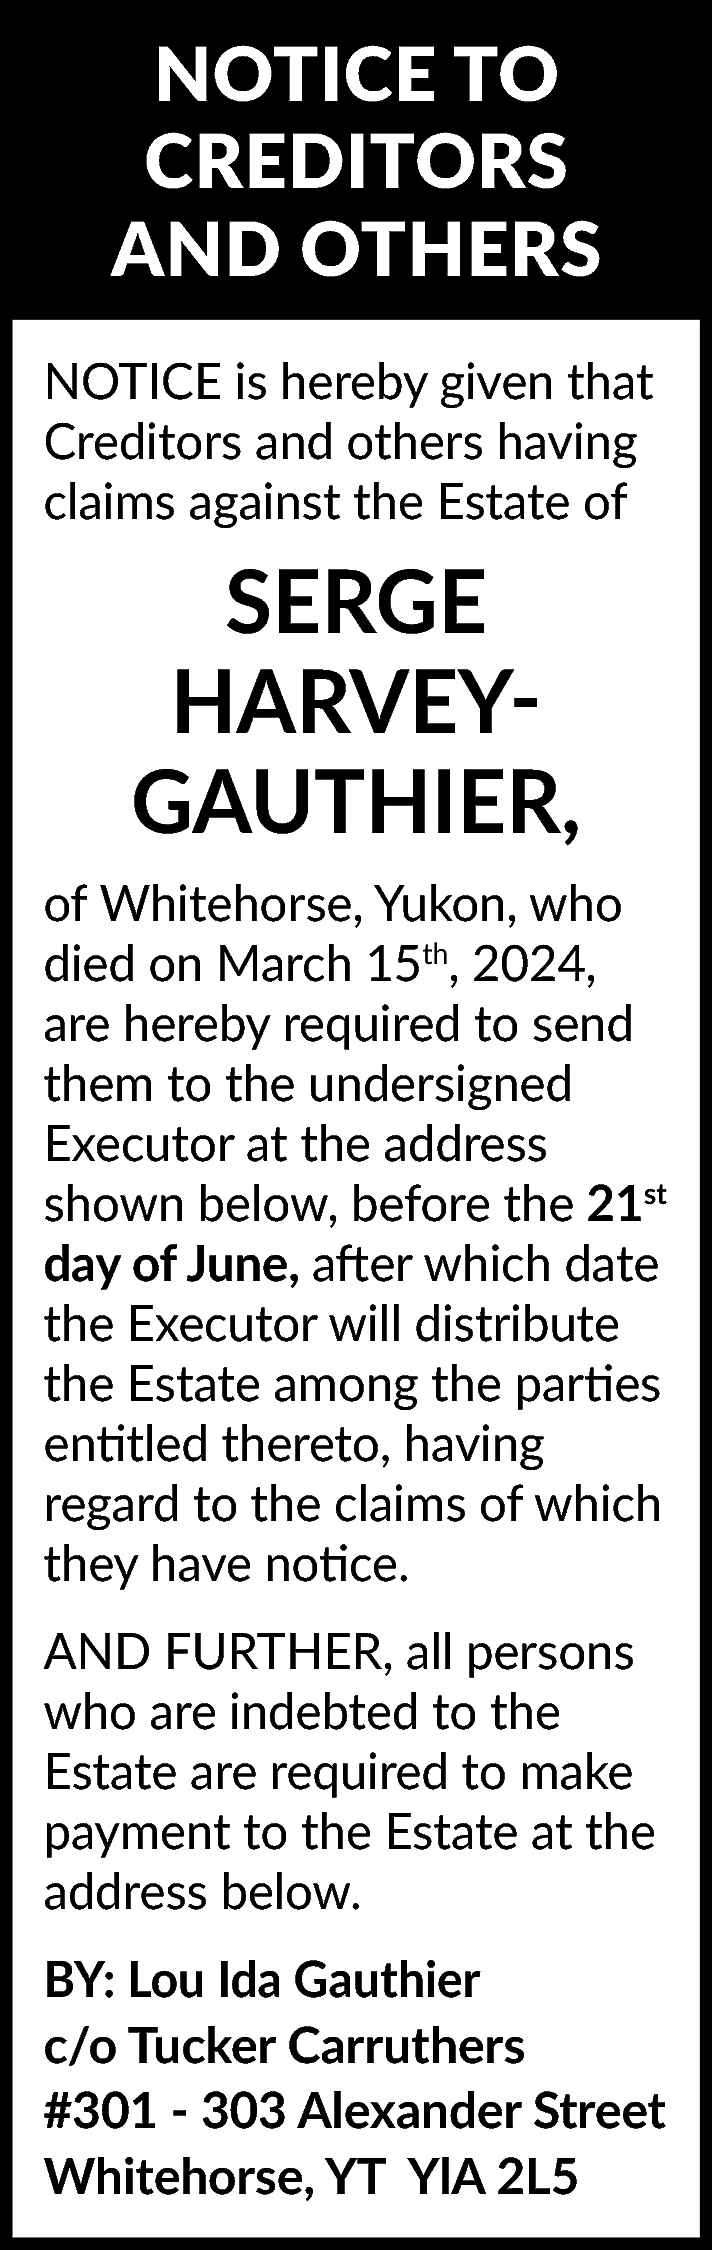 NOTICE TO <br>CREDITORS <br>AND OTHERS  NOTICE TO  CREDITORS  AND OTHERS  NOTICE is hereby given that  Creditors and others having  claims against the Estate of    SERGE  HARVEYGAUTHIER,  of Whitehorse, Yukon, who  died on March 15th, 2024,  are hereby required to send  them to the undersigned  Executor at the address  shown below, before the 21st  day of June, after which date  the Executor will distribute  the Estate among the parties  entitled thereto, having  regard to the claims of which  they have notice.  AND FURTHER, all persons  who are indebted to the  Estate are required to make  payment to the Estate at the  address below.  BY: Lou Ida Gauthier  c/o Tucker Carruthers  #301 - 303 Alexander Street  Whitehorse, YT YlA 2L5    